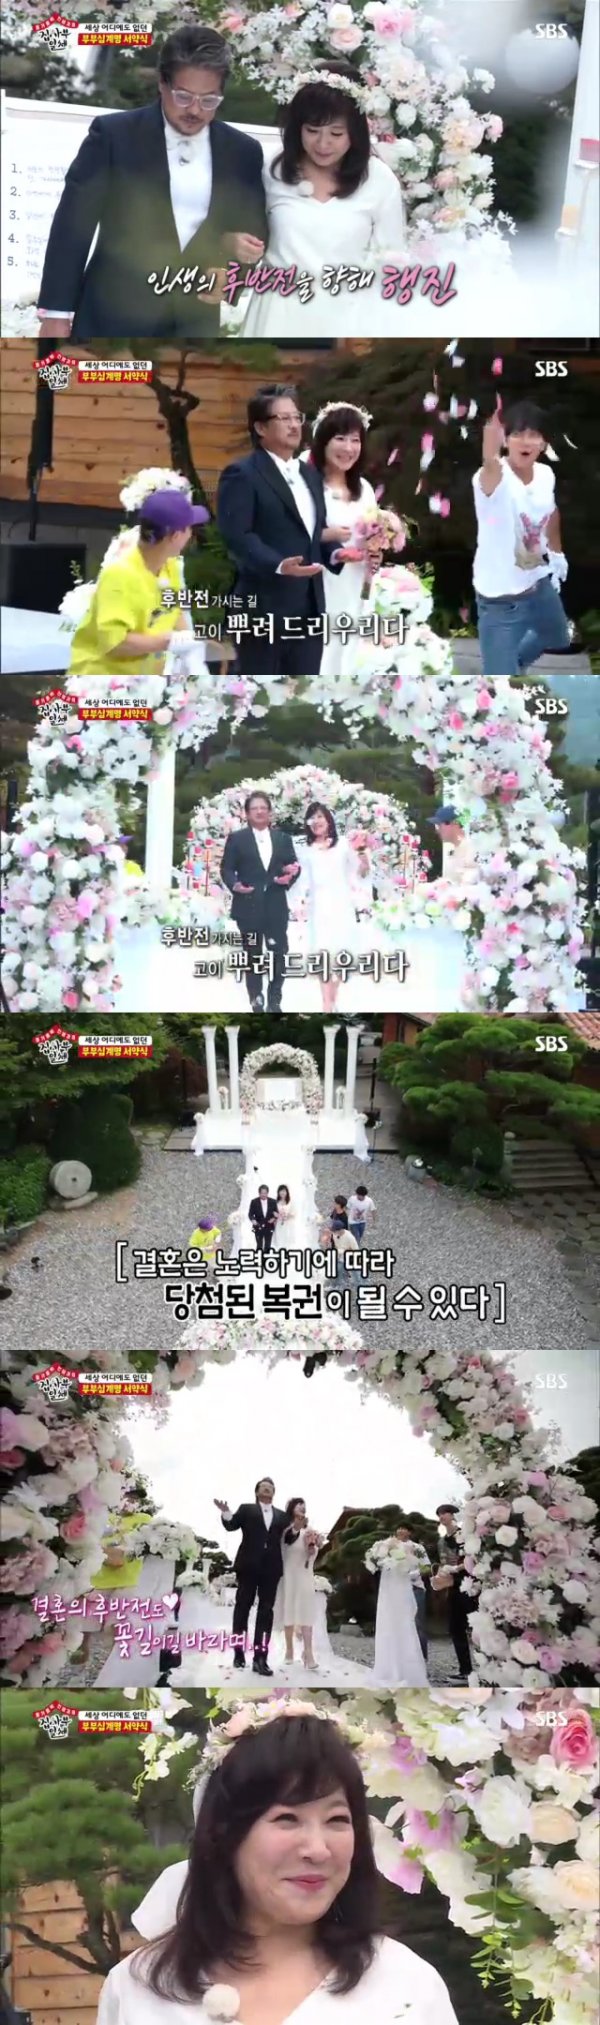 The 26th year of marriage, Noh Sa-yeon and James Moosong Lee completed the Ten Commandments of the Real-life Couple.On SBS All The Butlers broadcast on the 1st, Lee Seung-gi, Lee Sang-yoon, Yook Sungjae, and Yang Se-hyeong, who complete the Ten Commandments of Couples with Noh Sa-yeon and James Moosong Lee, were portrayed.Lee Seung-gis proposal was to put a water bomb penalty on the couples quiz, in which the team who had been quizzed asked to add commandments at random.Lee Seung-gi, Yook Sungjae were divided into Noh Sa-yeon team, Yang Se-hyeong, Lee Sang-yoon was divided into James Moosong Lee team.First, Noh Sa-yeon said, I hated my husband to some extent when I hated him. Lee Seung-gi answered, The frame is falling.James Moosong Lee quizzed, I am a deer wife, but I have never lost this thing because I am called a strong deer. The answer was arm wrestling.The members turned into human thimbles as a penalty to drop the thimble with water on their face.Later, the members suggested that they should say, Thank you for marrying me every night, I love you, about the couples ten commandments.James Moosong Lee, who said, It is not because I do not like it, but because I did not try it, decided, I will do it from today.In fact, James Moosong Lee said, Thank you for marrying me, when he saw his former Noh Sa-yeon.The next morning, as a surprise guest, Noh Sa-yeons sister, Nosabong, and her cousin Han Sang-jin came to visit.Nosabong prepared a morning table full of sincerity for the two people and members, and the members showed Morning Mukbang as soon as they opened their eyes.Lee Seung-gi said, I have been up for about seven minutes and the audio does not empty. Han Sang-jin said, My family should not rest, Lee Sang-yoon said, When I come to my house, entertainment will be soon.Over breakfast, James Moosong Lee applied for a couples Ten Commandments adjustment.James Moosong Lee said, Noh Sa-yeon says I do not love him no matter what I do.Yang Se-hyeong asked to be a forbidden word, and Han Sang-jin sided with James Moosong Lee, saying, The love of 0th place is Noh Sa-yeon to James Moosong Lee.Noh Sa-yeon and James Moosong Lee have since posted a couples ten commandments to honor each other, not to be wicked.